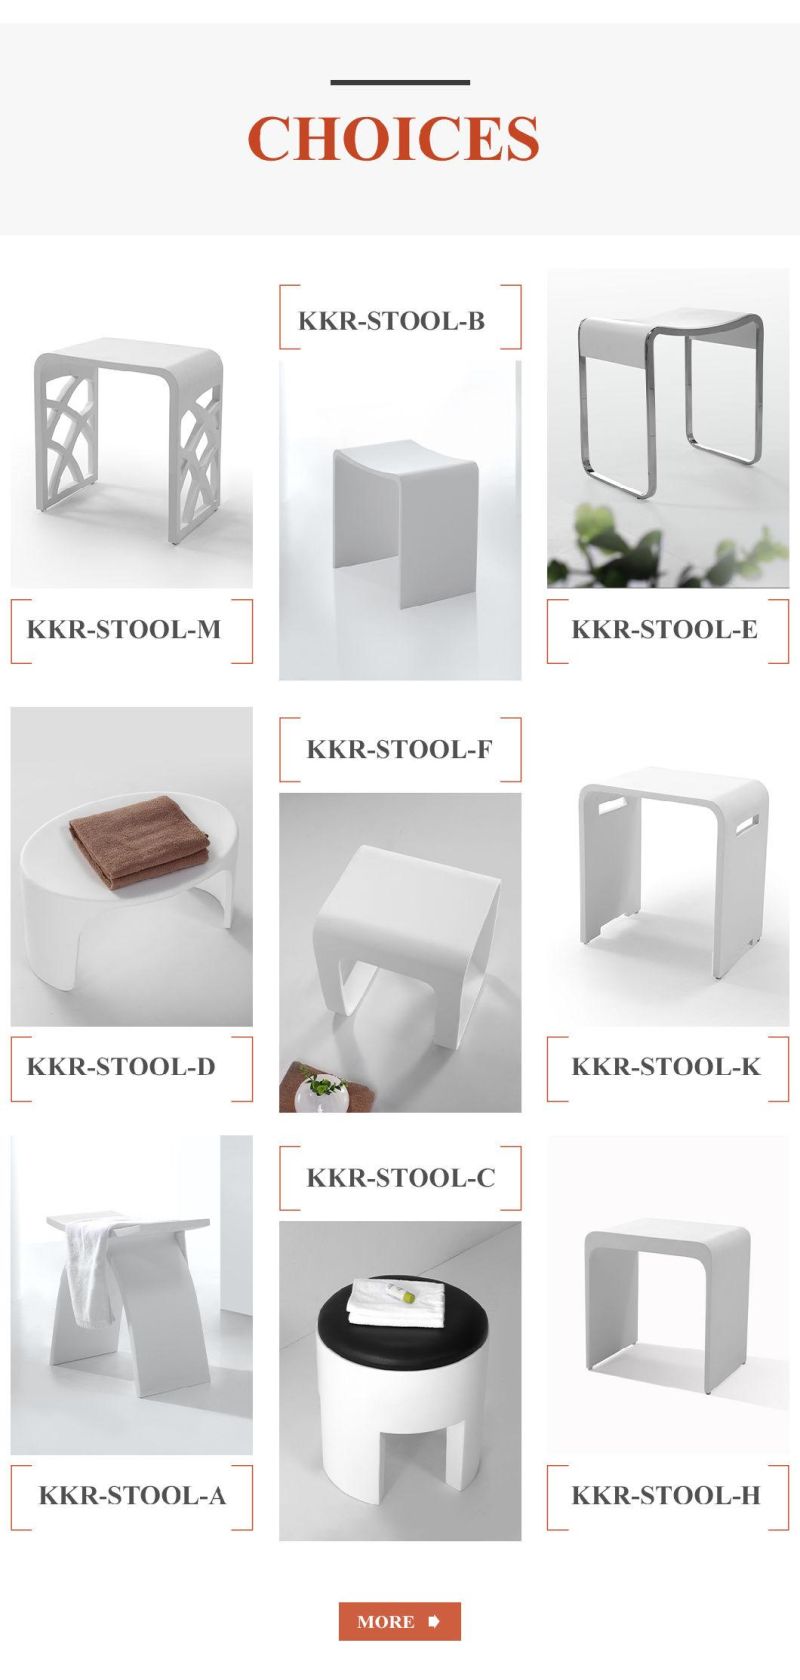 Hot-Selling Resin Stone Solid Surface Chair Bathroom Shower Stools